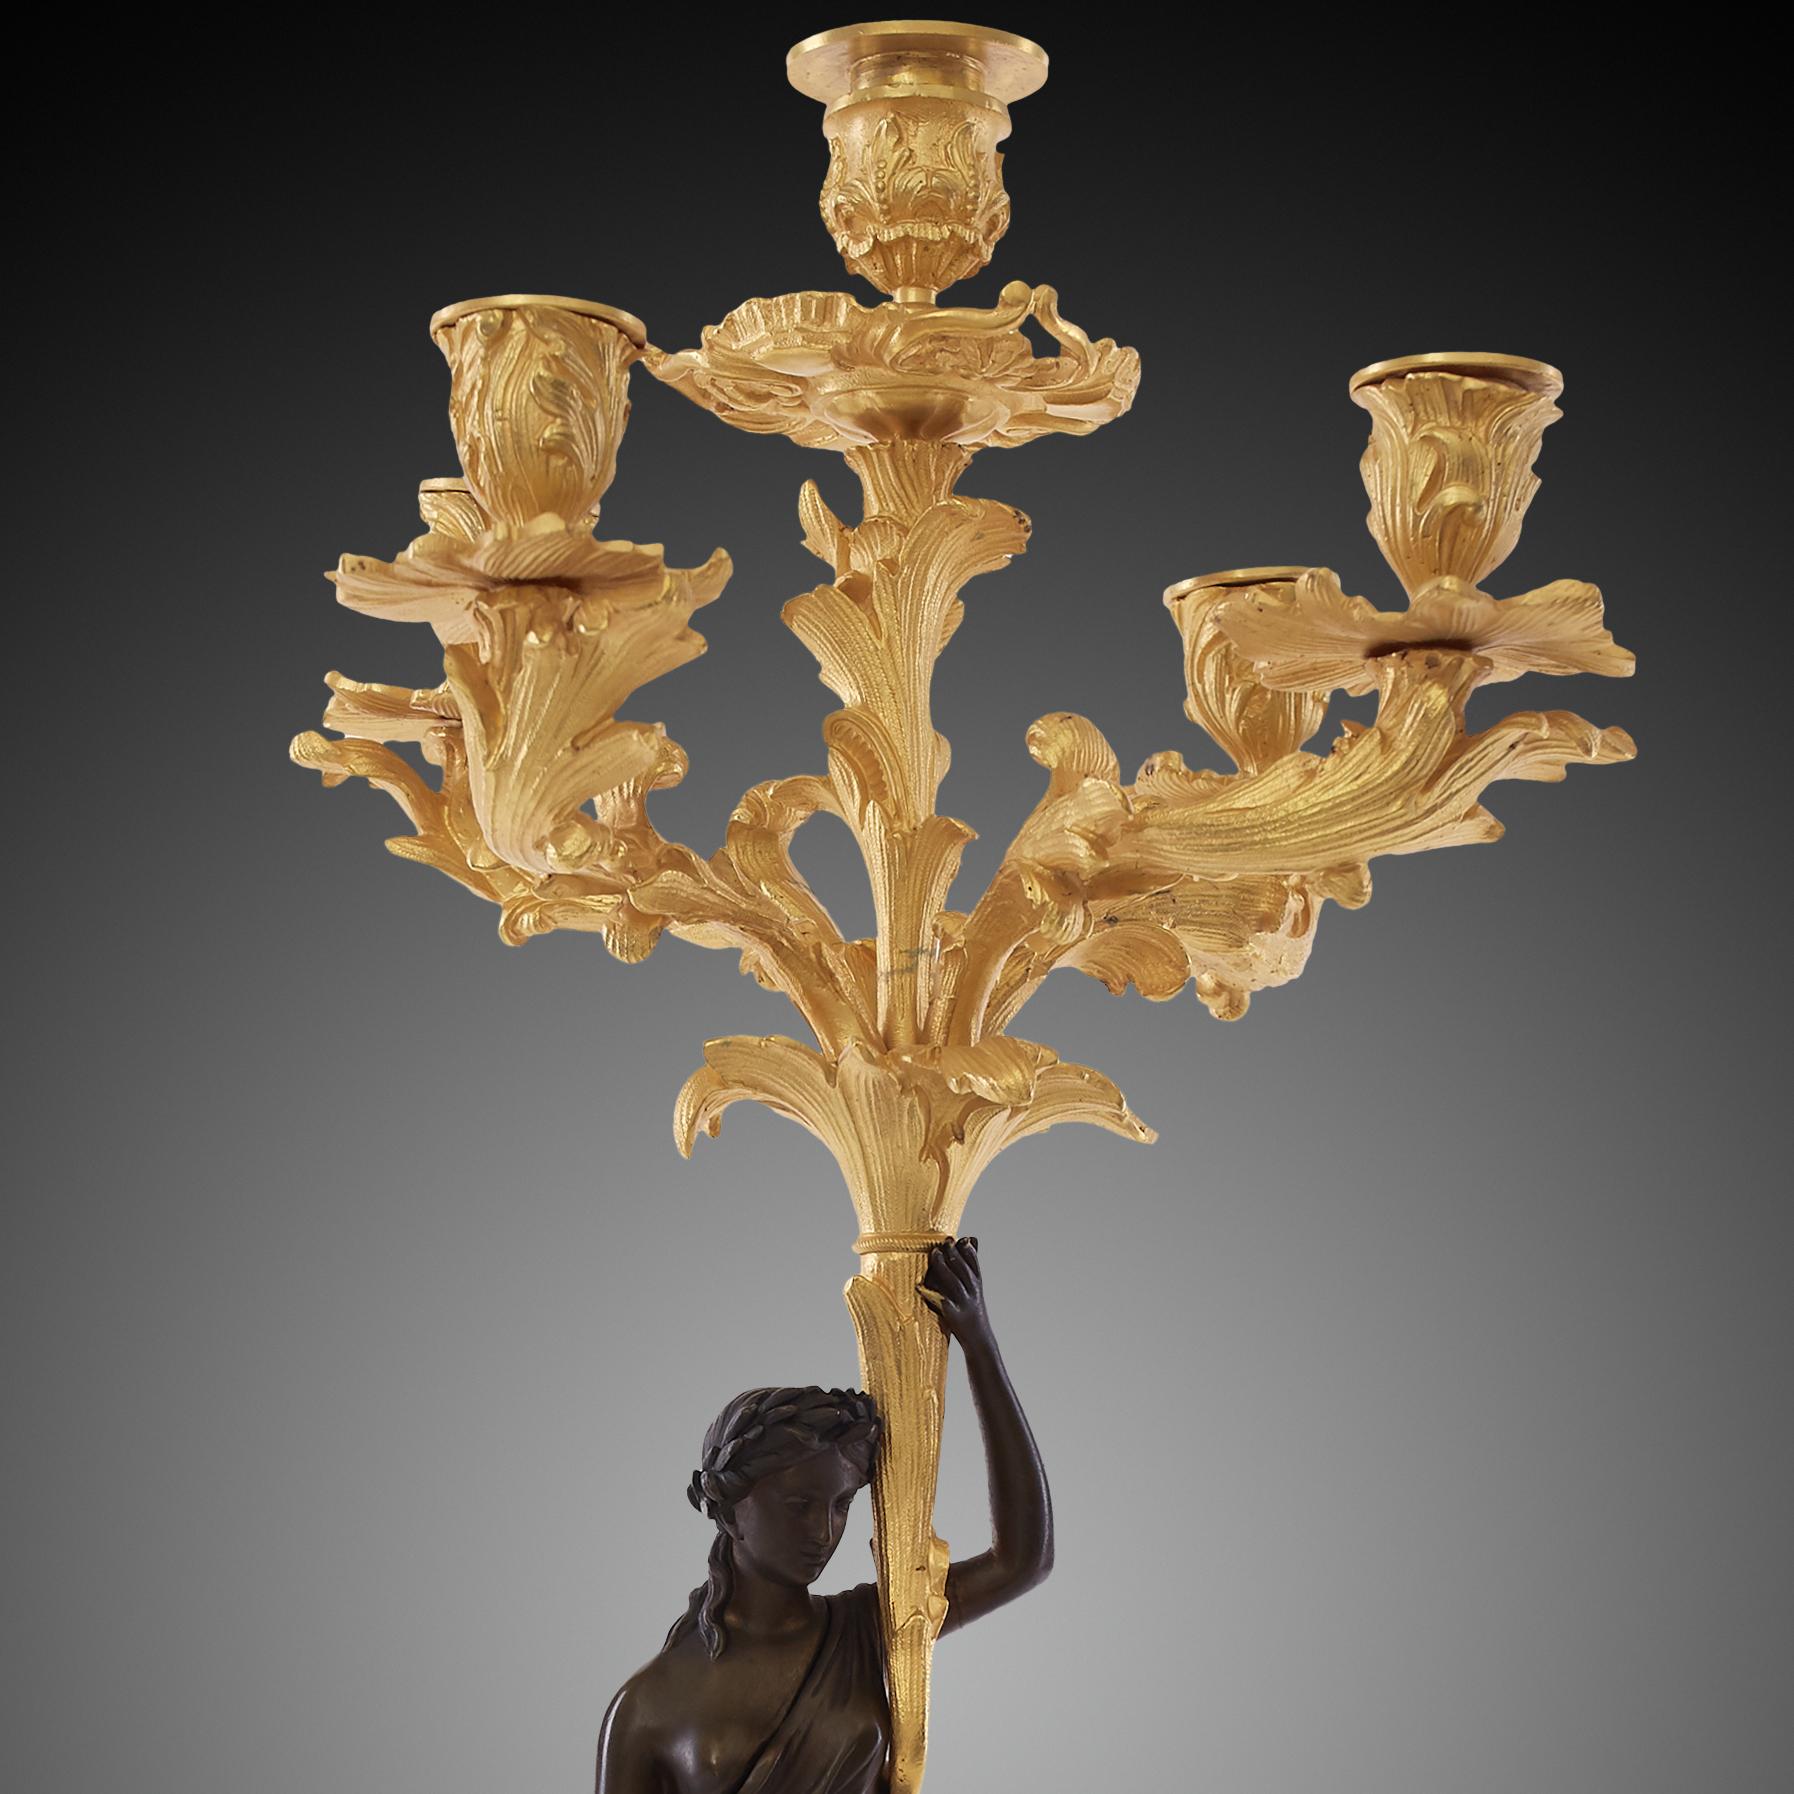 These are a pair of gilded candelabras inspired by the Louis XVI style-a style originating from France. The main shaft of the candelabras are constructed from female statues. Unlike the rest of the gilded parts of the candelabra, the women are made